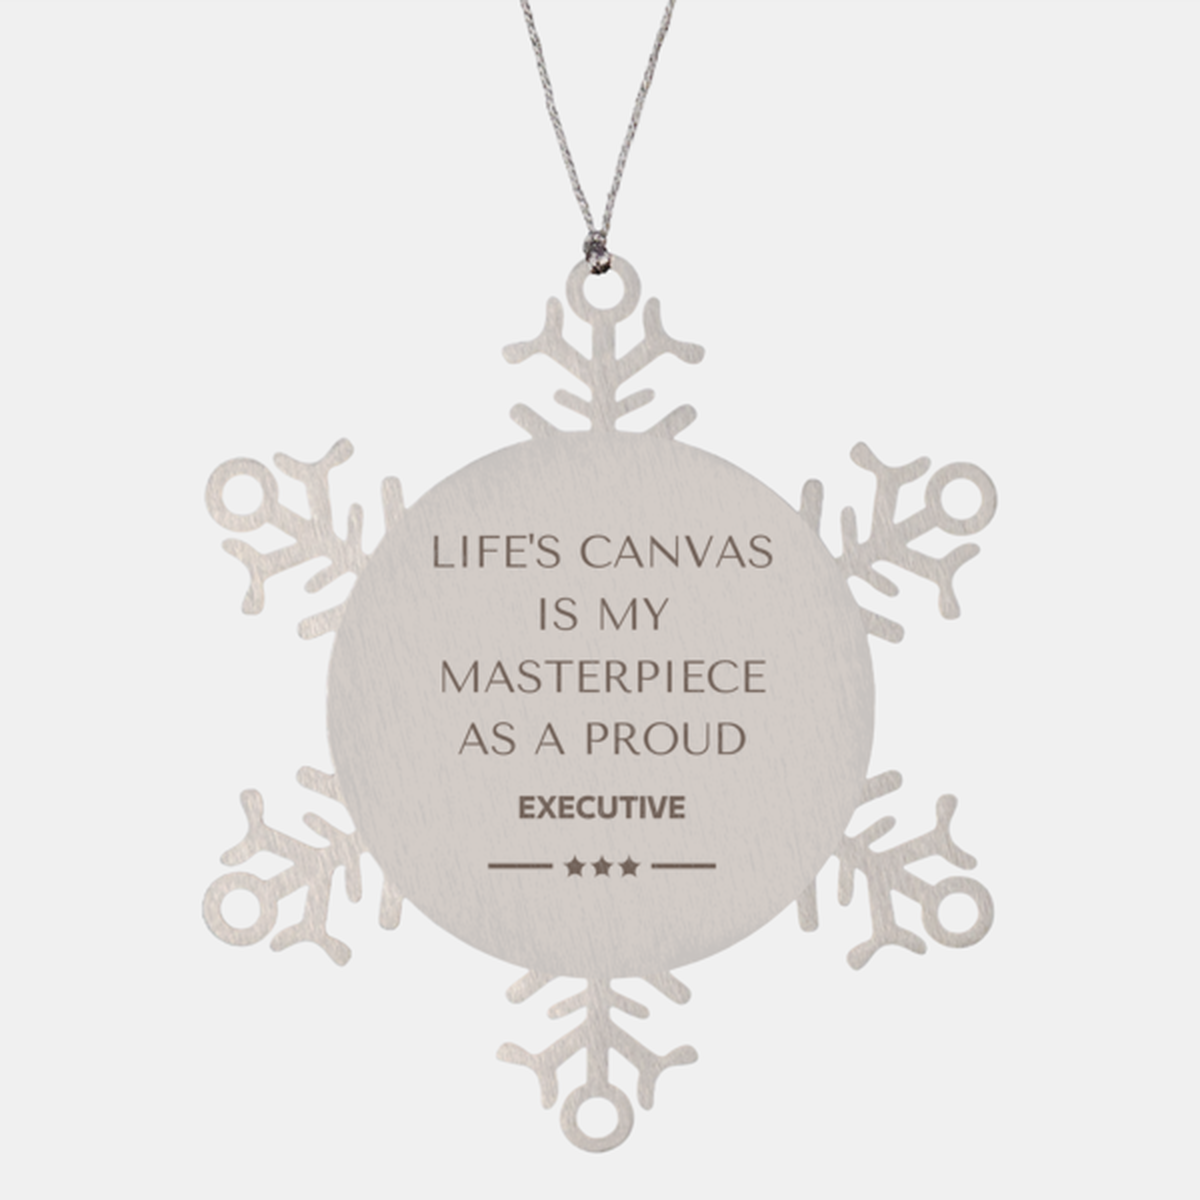 Proud Executive Gifts, Life's canvas is my masterpiece, Epic Birthday Christmas Unique Snowflake Ornament For Executive, Coworkers, Men, Women, Friends